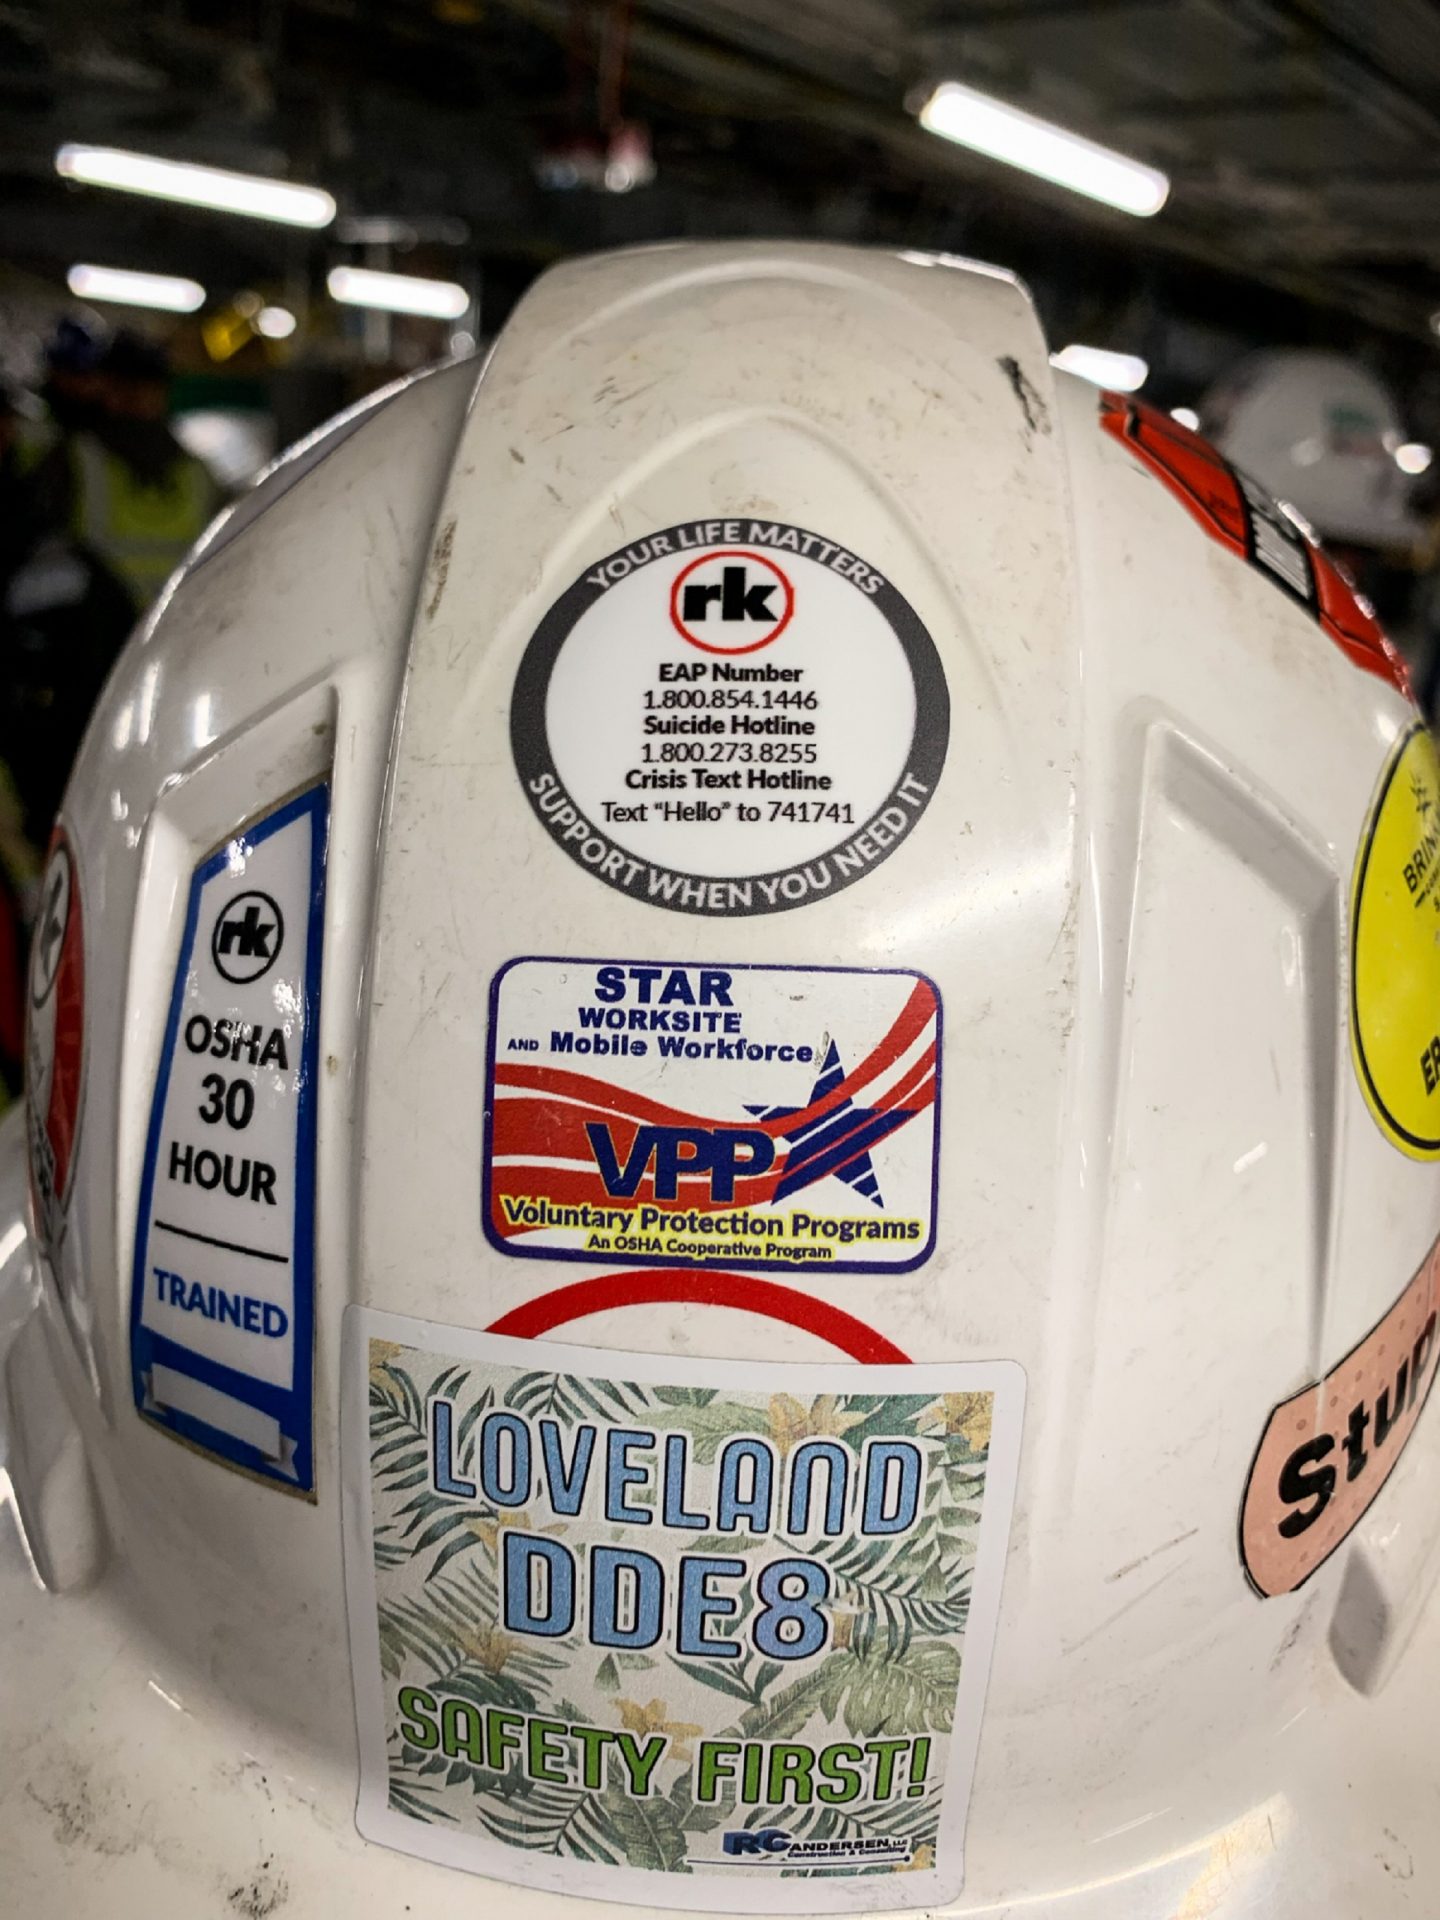 An RK hard hat sticker provides numbers for the company's employee assistance program, a suicide hotline and a crisis text line.